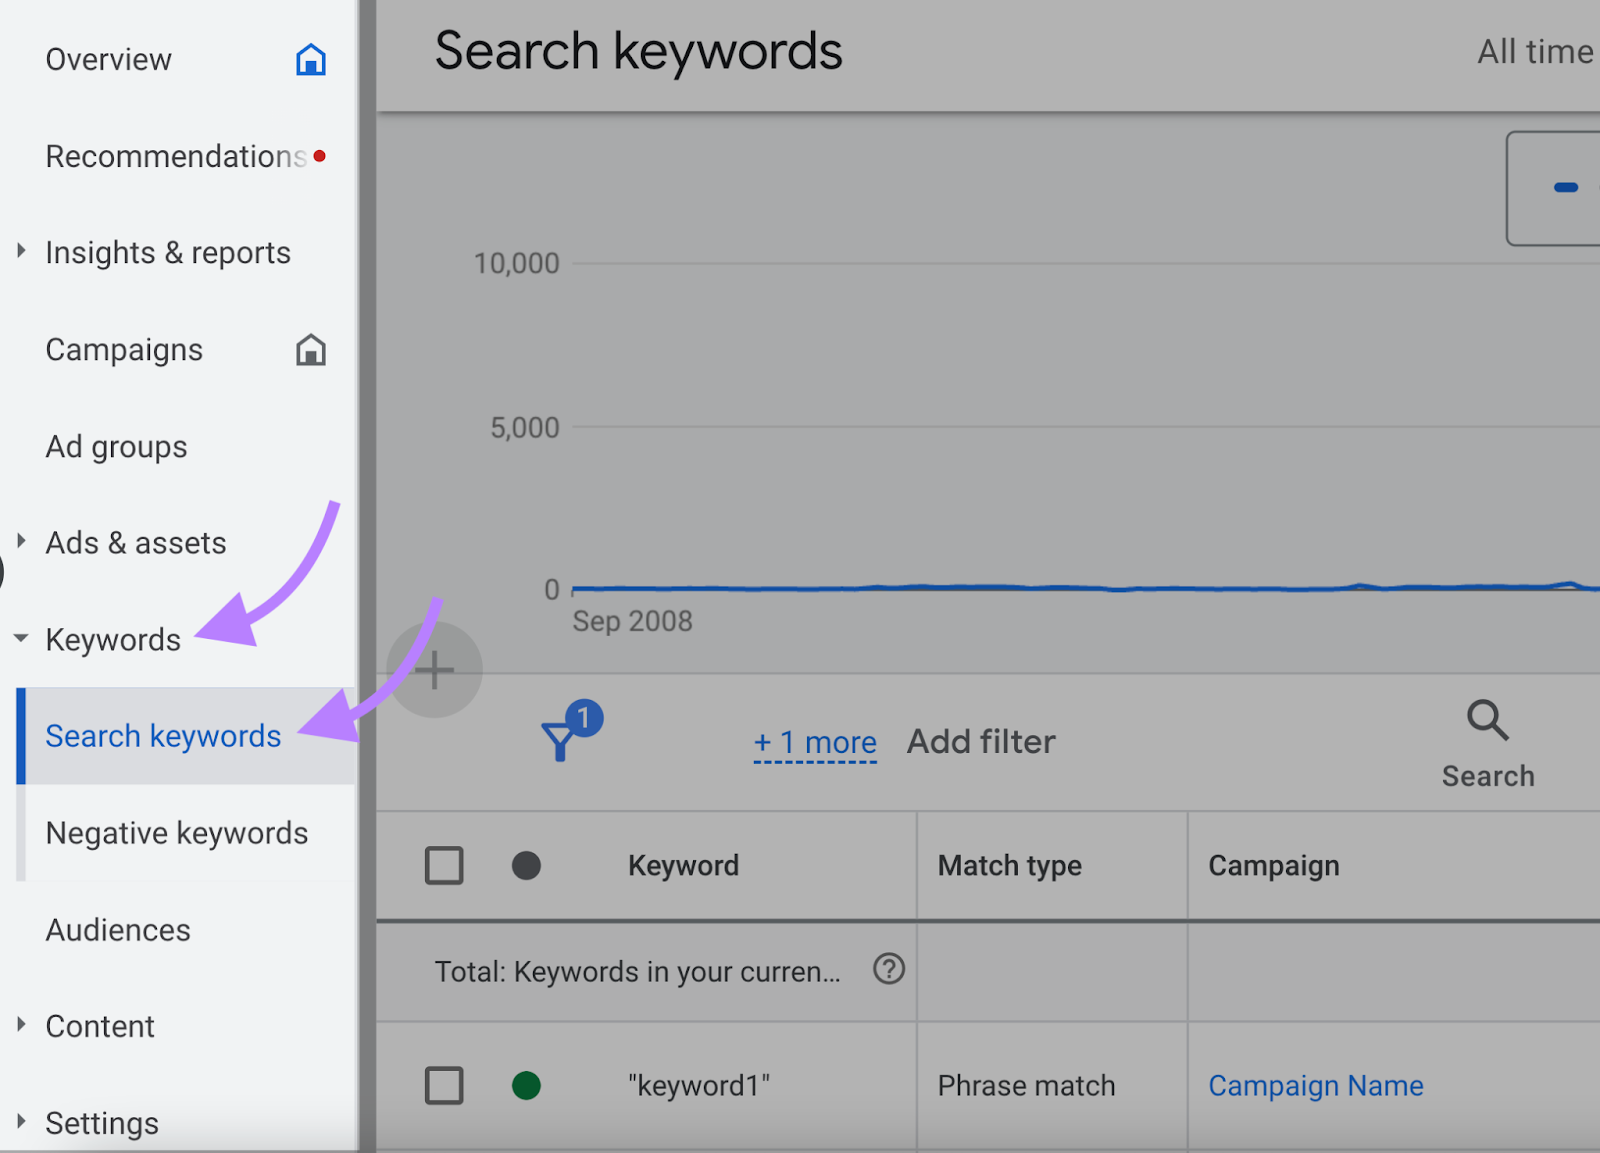 navigation to “Search keywords” section 